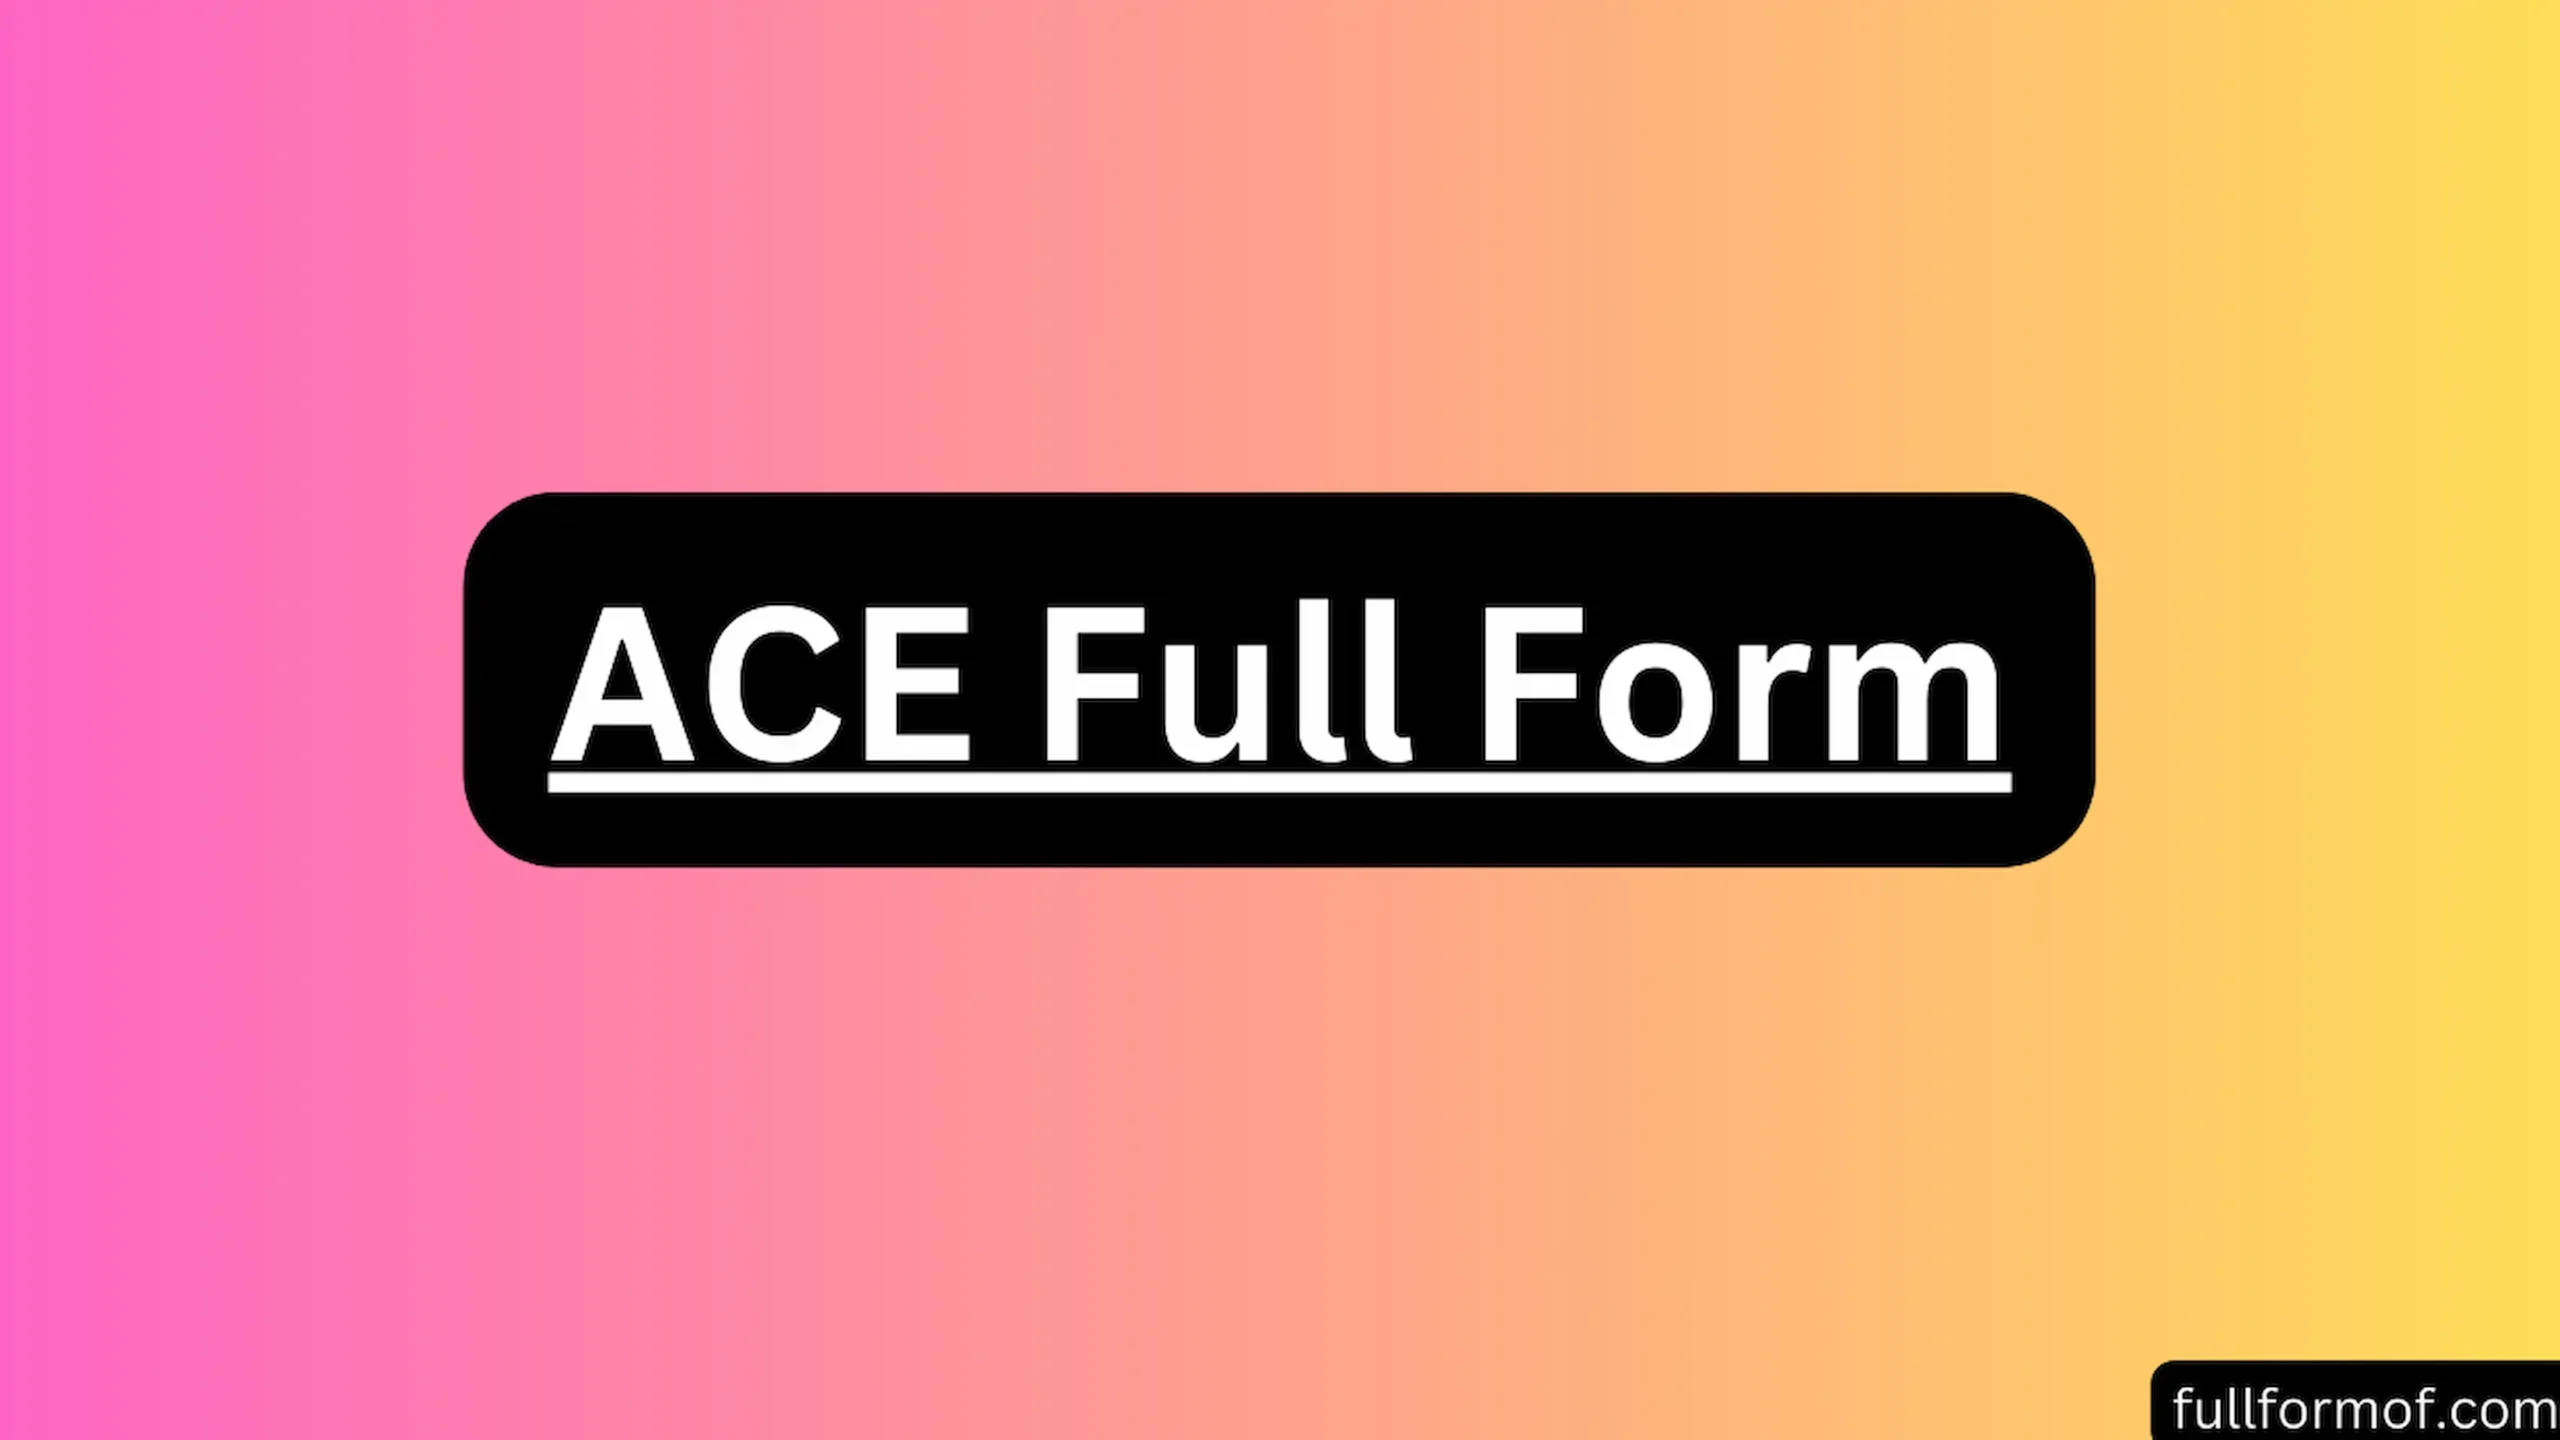 ACE Full Form